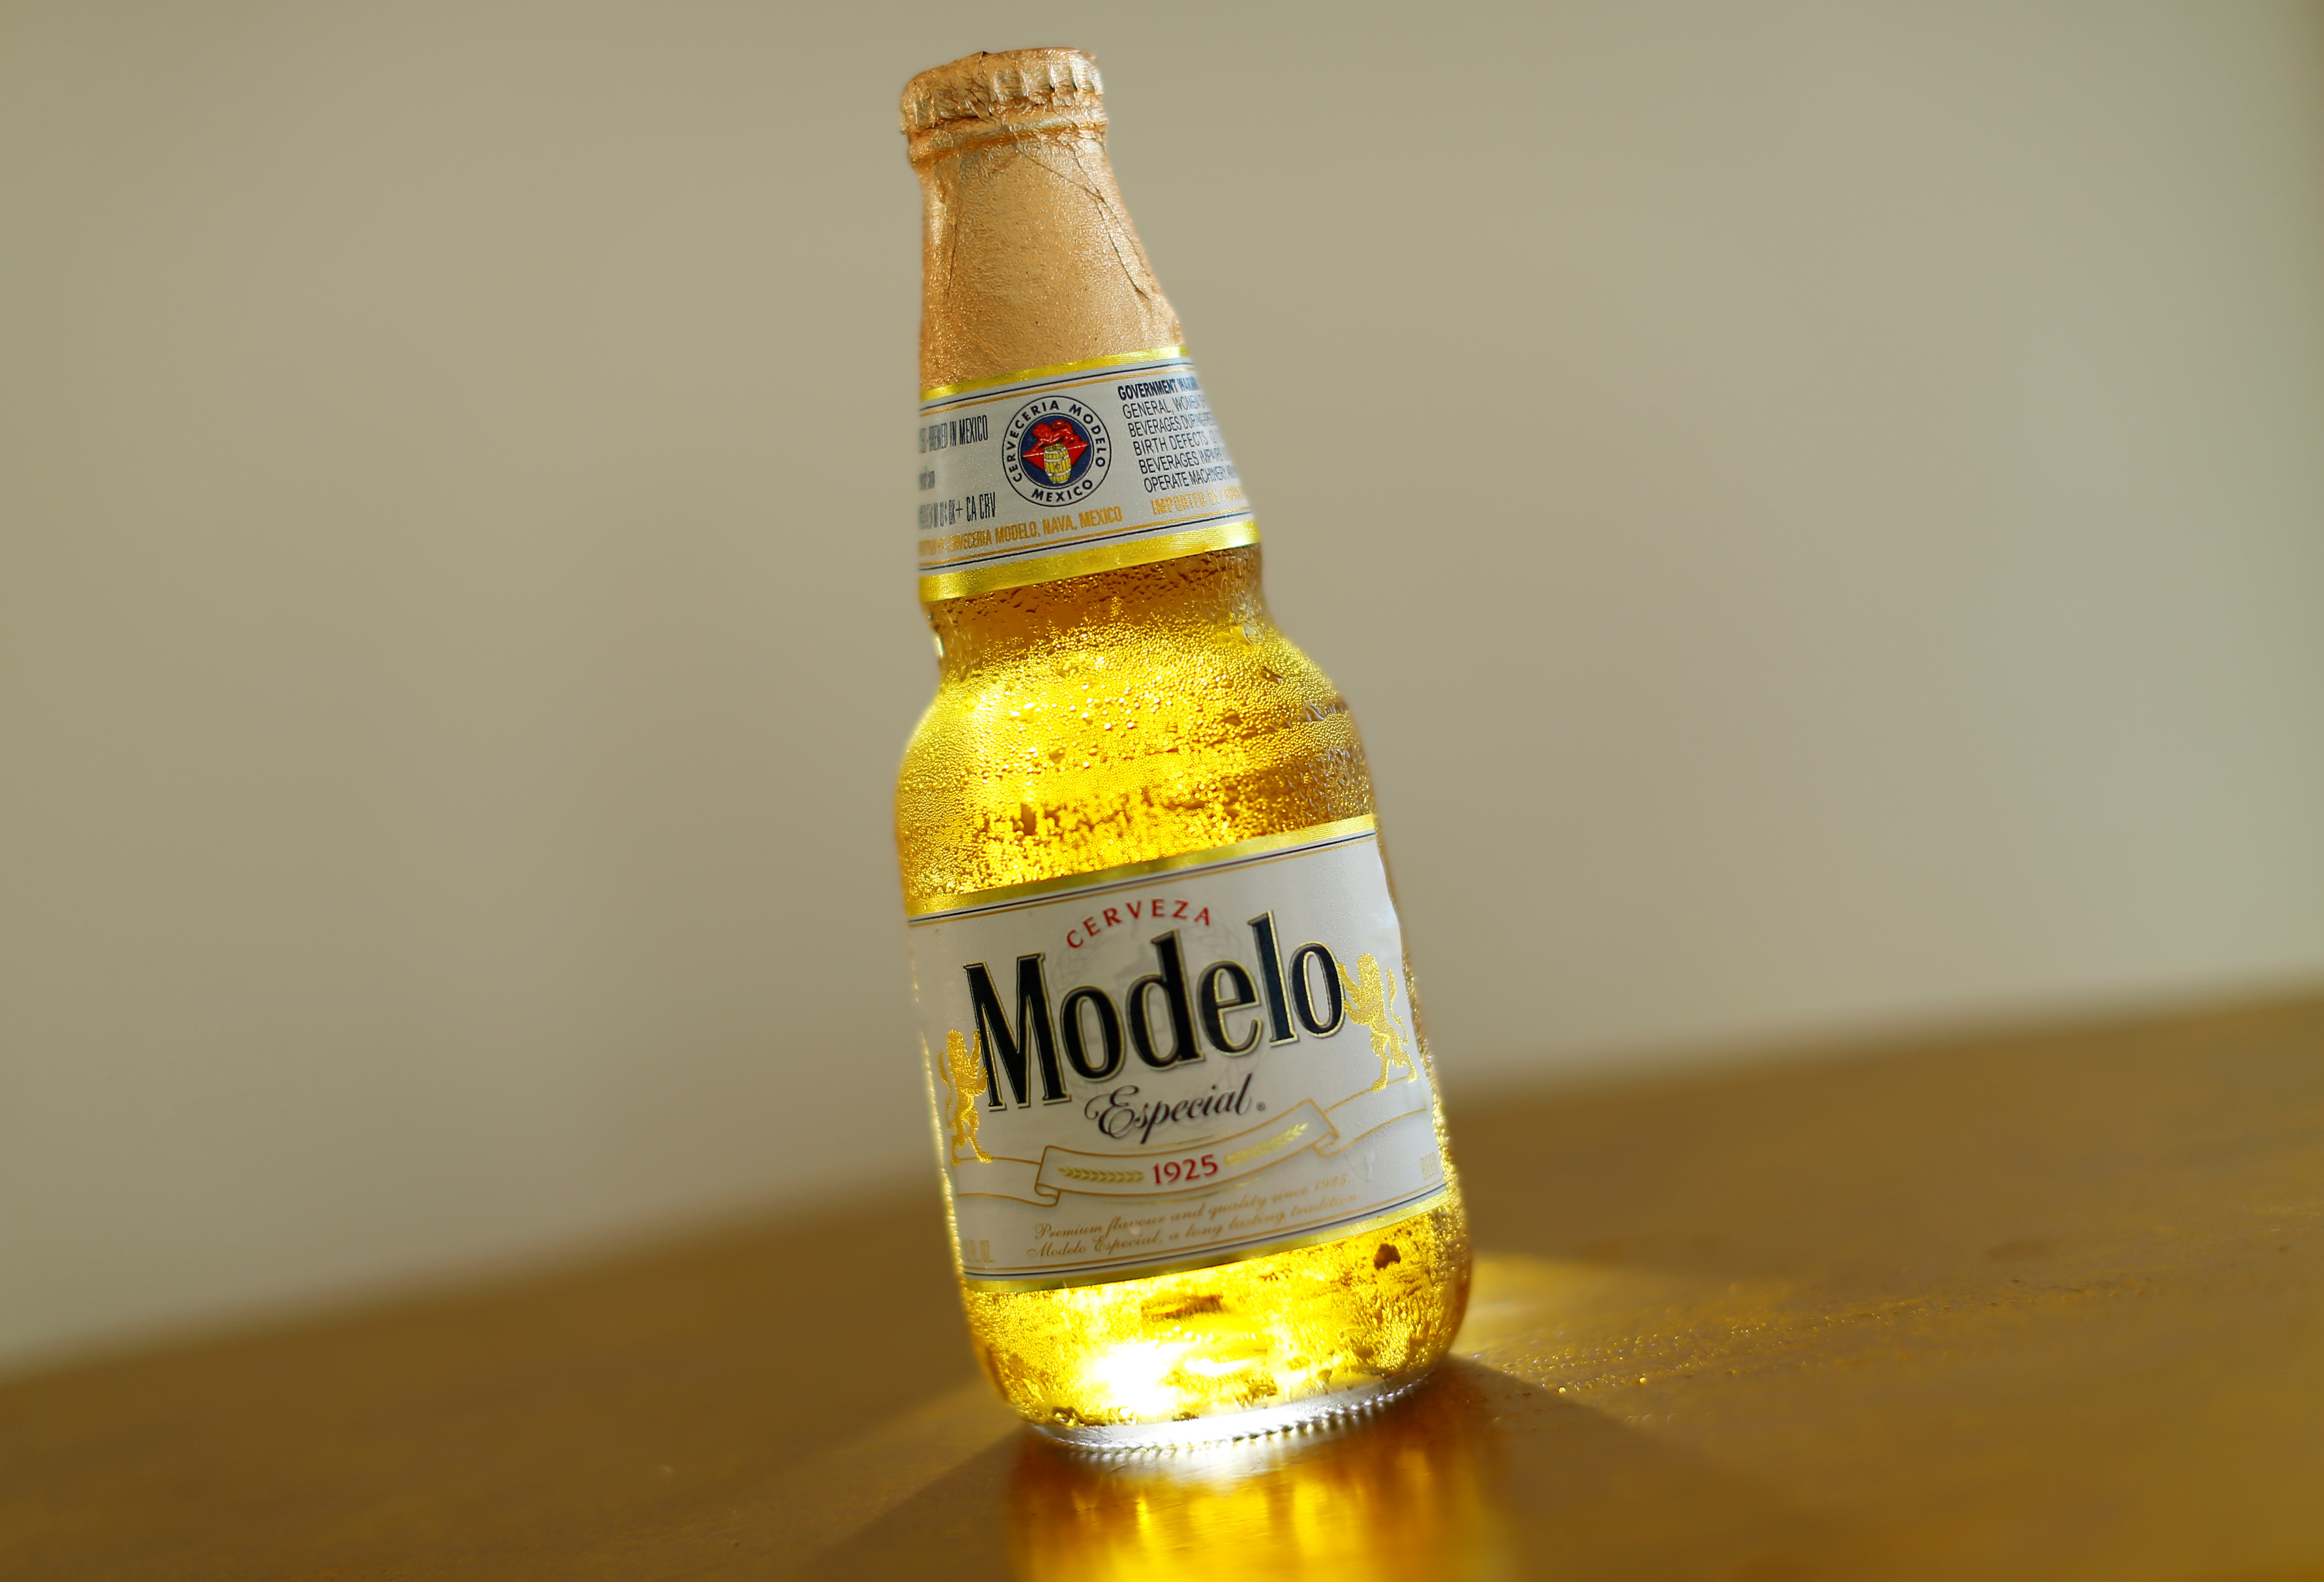 Analyst explains how Modelo was the one to dethrone Bud Light as